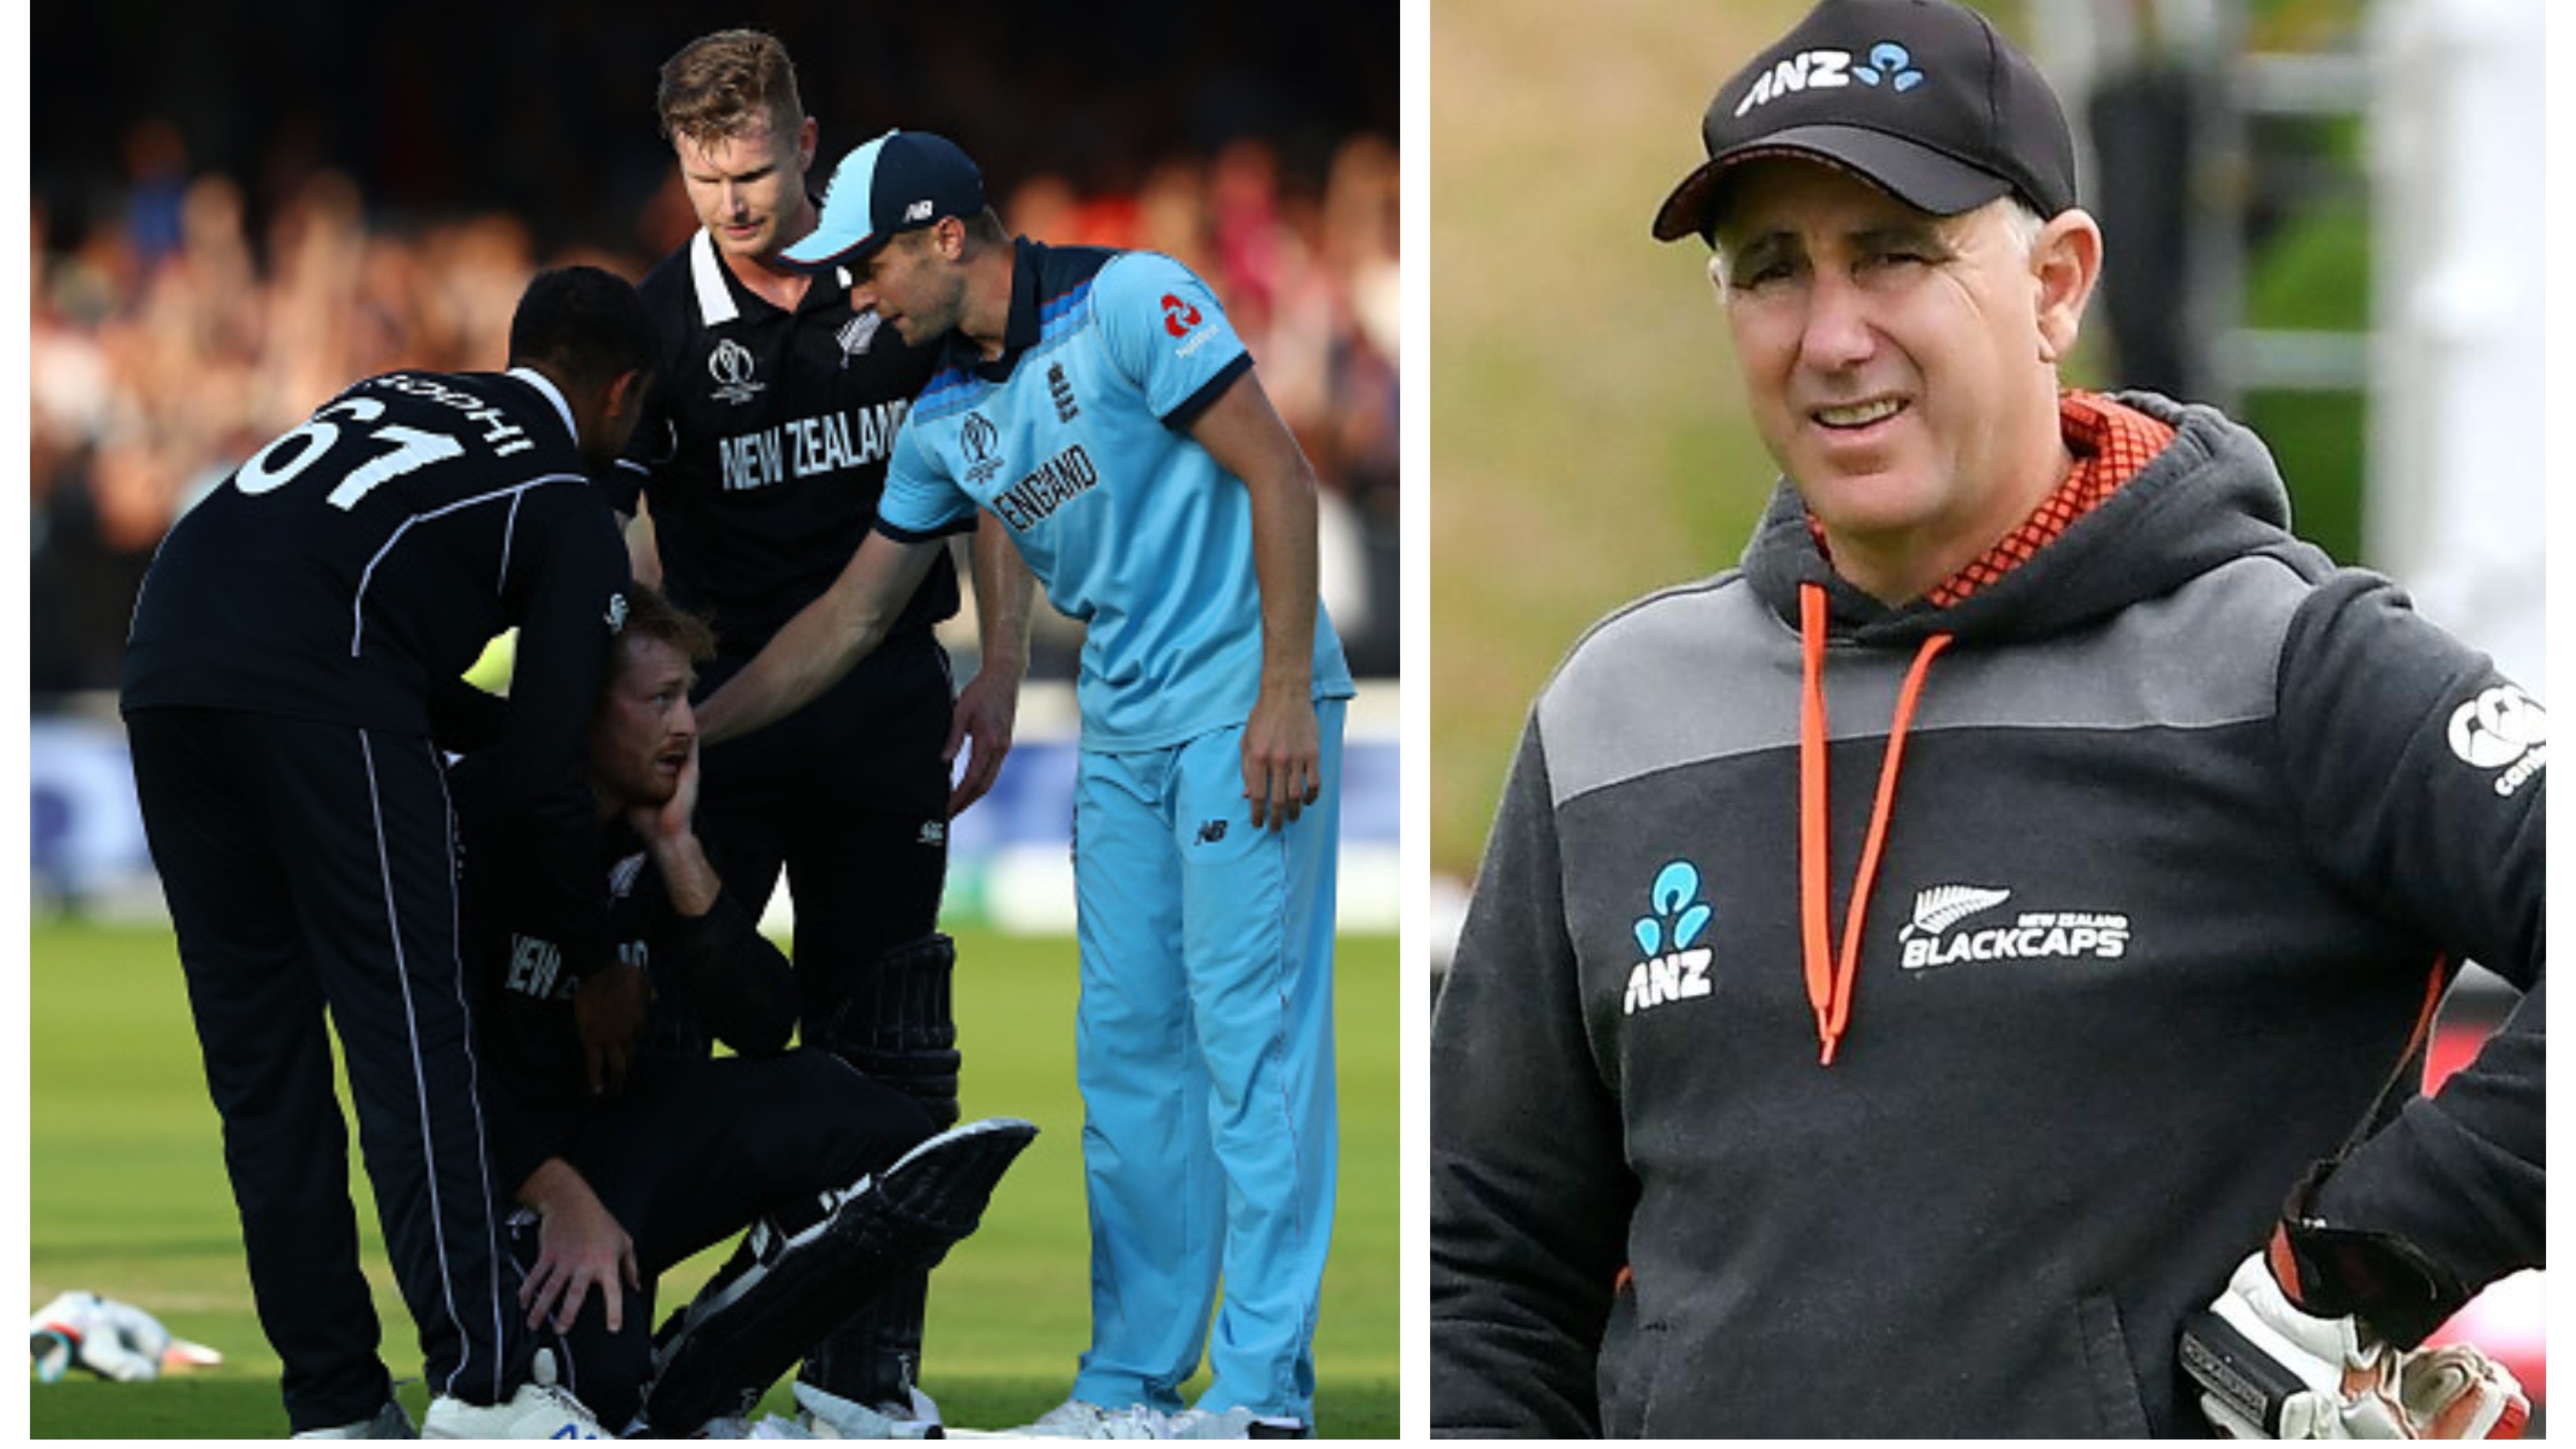 New Zealand coach admits he still feels numb over 2019 World Cup final loss on boundary count